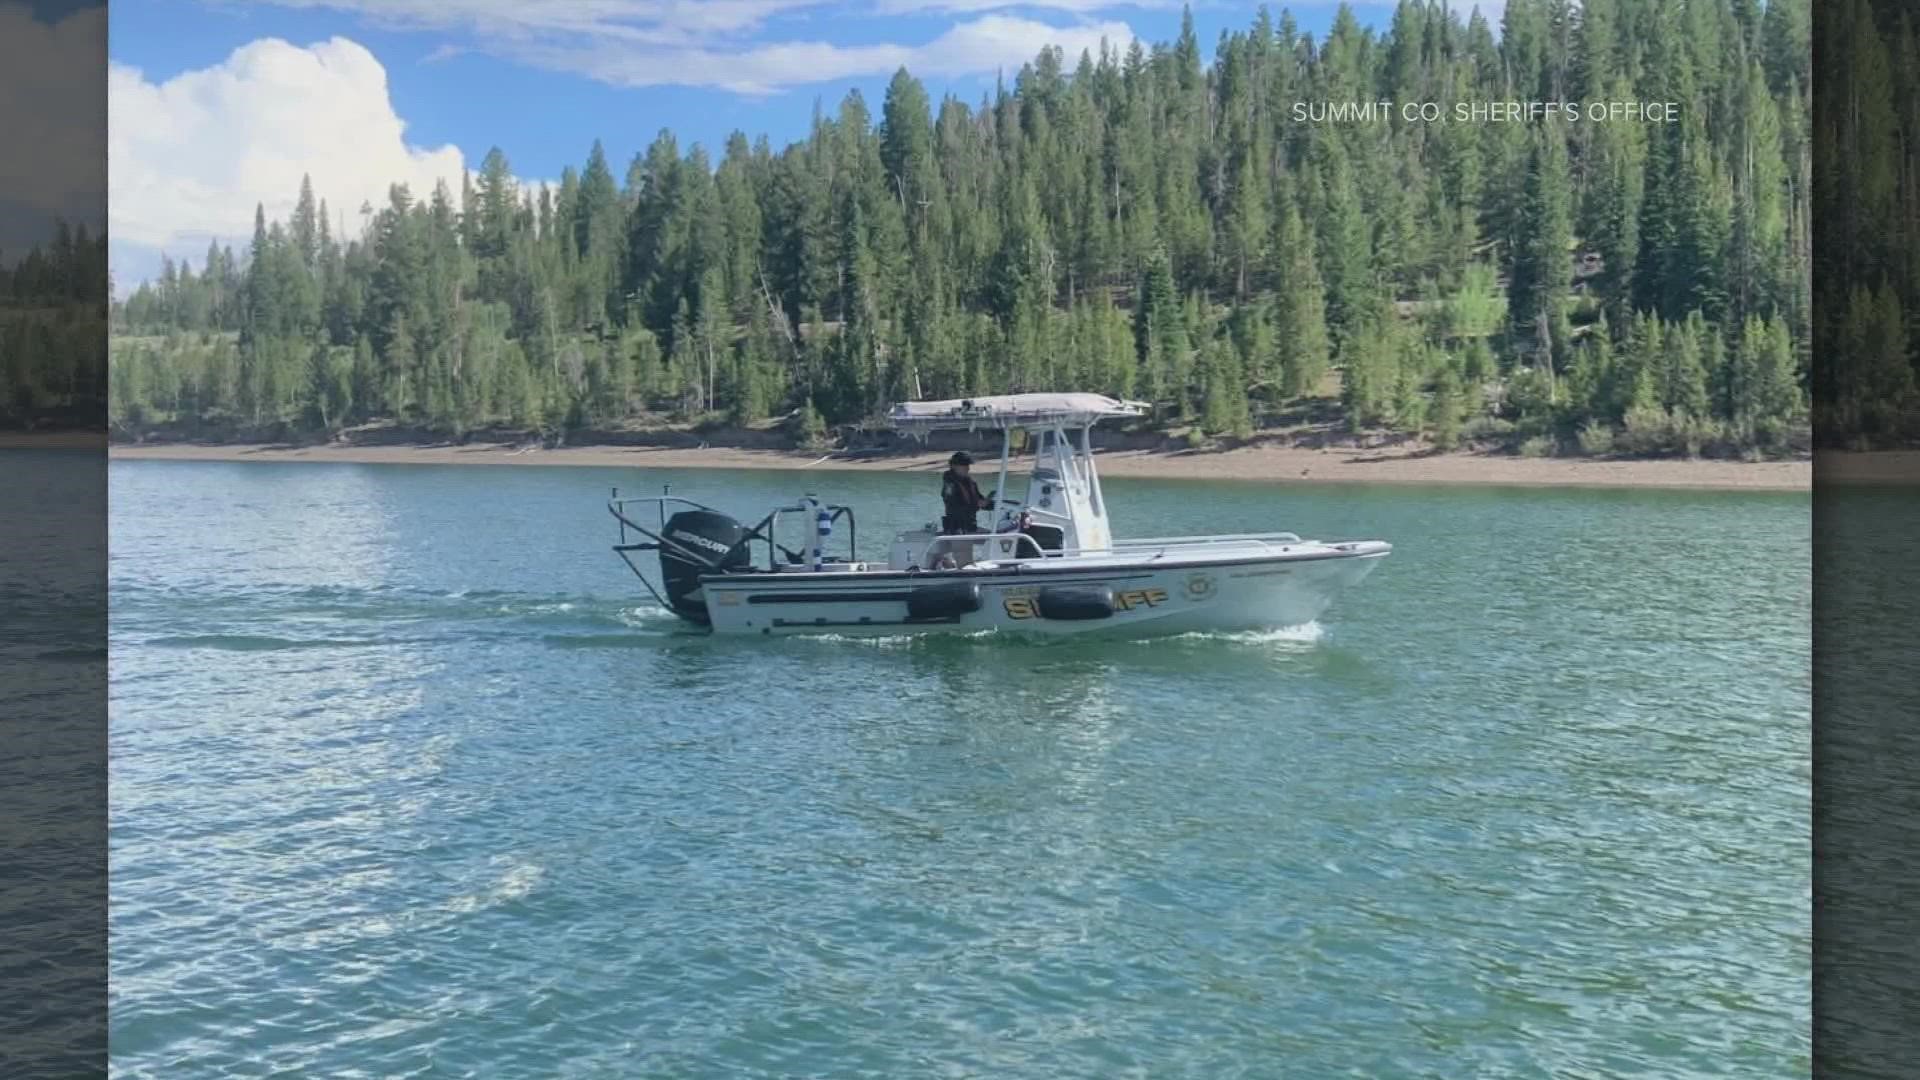 The Summit County Sheriff's Office used an underwater drone and other equipment to search Dillon Reservoir.